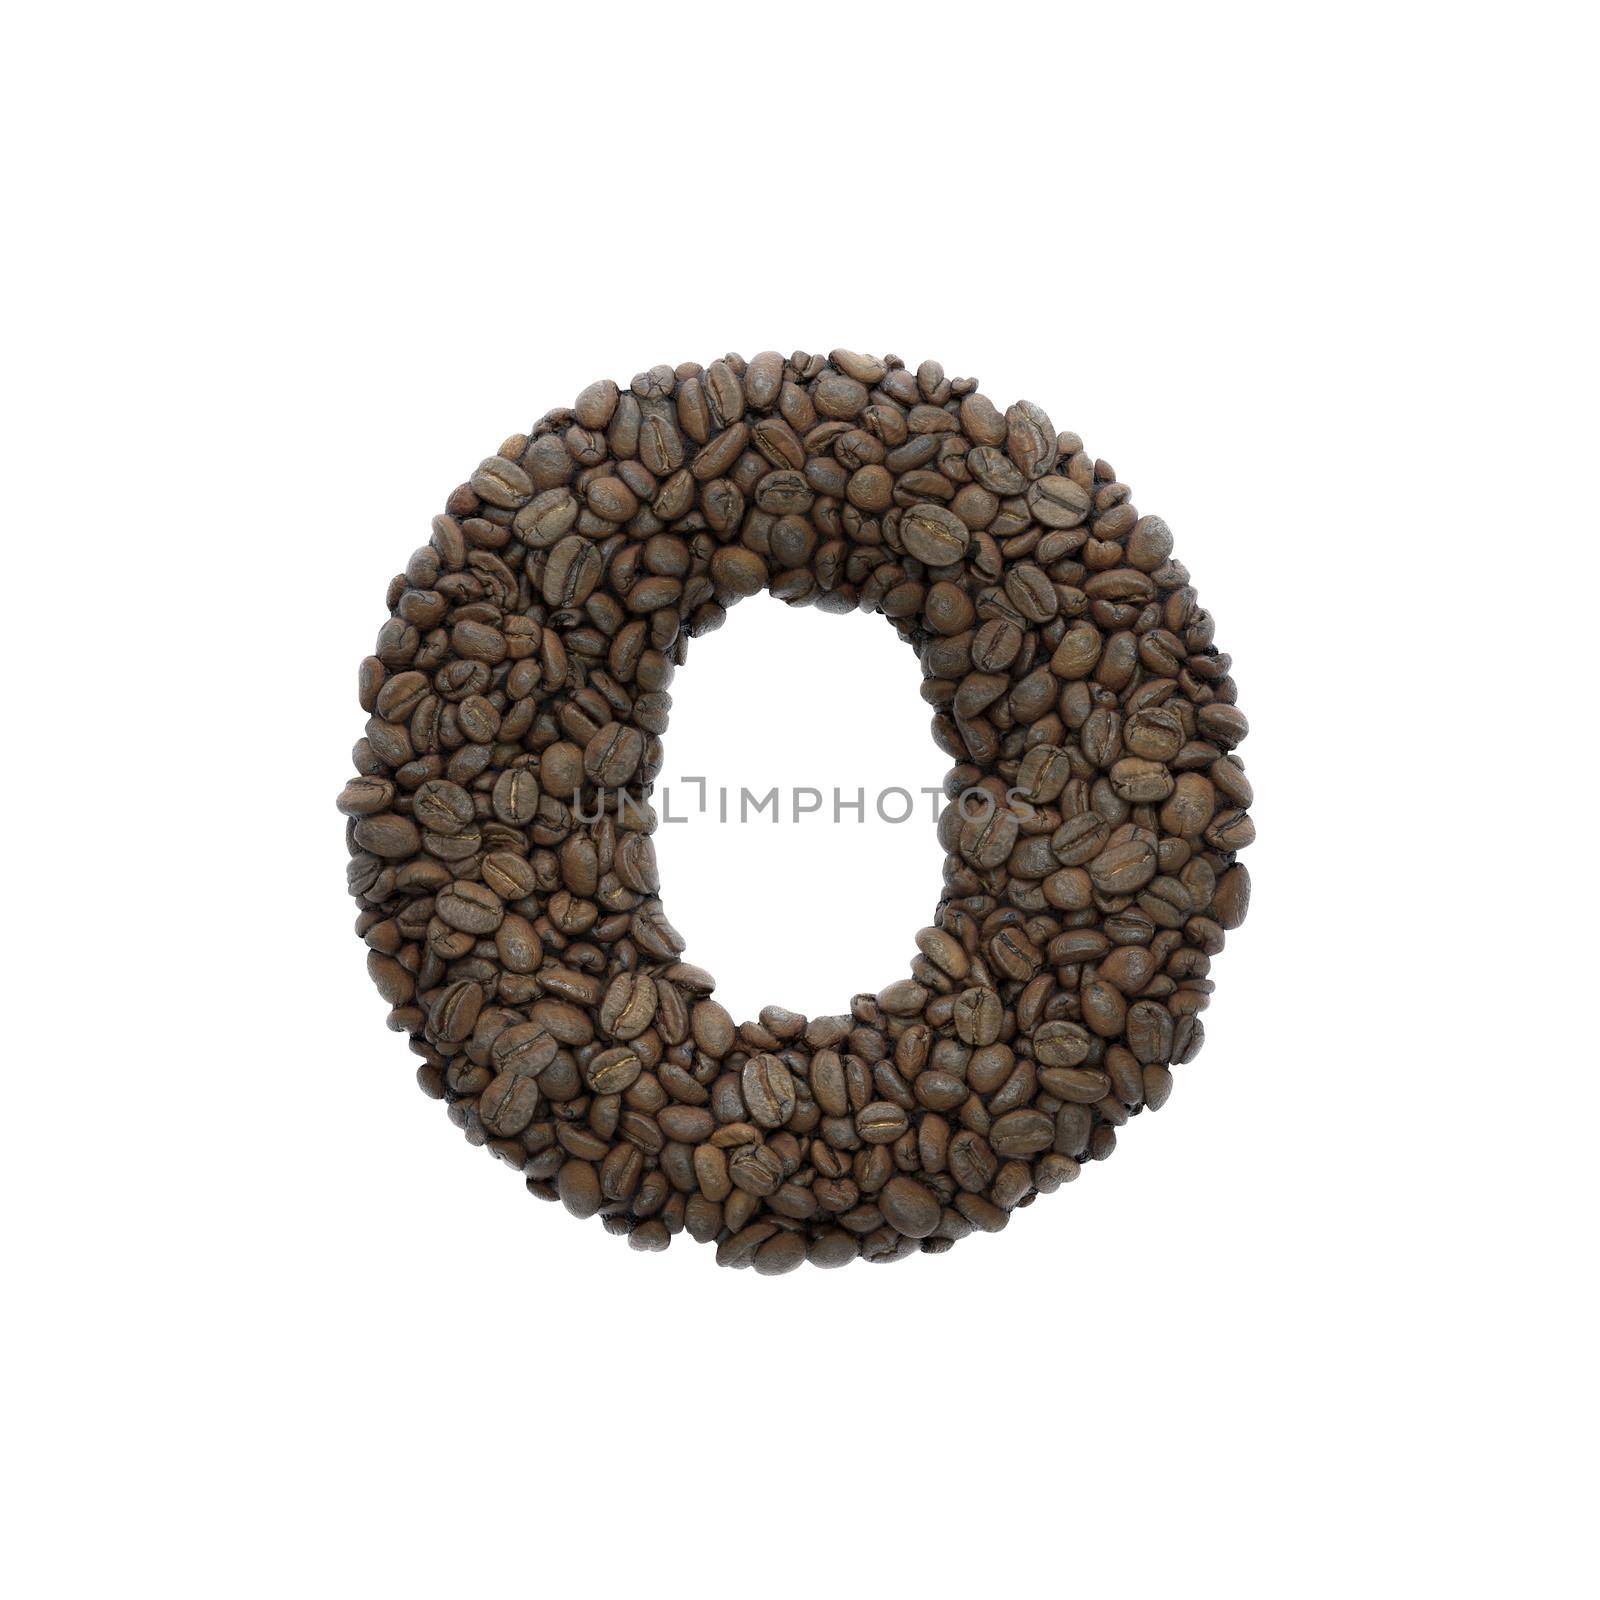 Coffee letter O - Small 3d roasted beans font - Suitable for Coffee, energy or insomnia related subjects by chrisroll